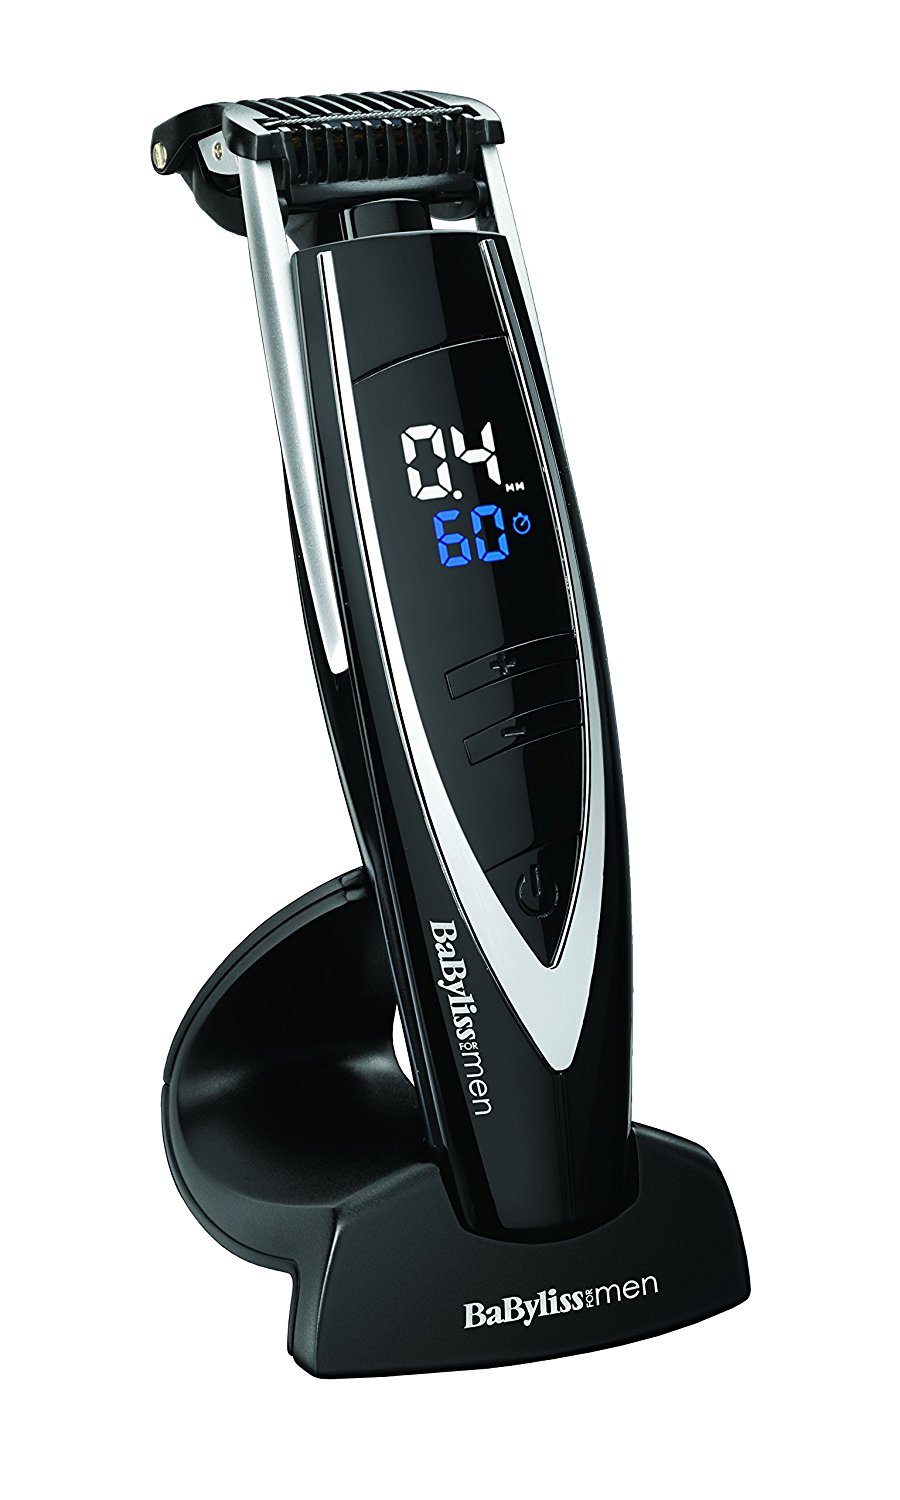 BaByliss for Men 7898U Super Stubble and Beard Trimmer UK Review